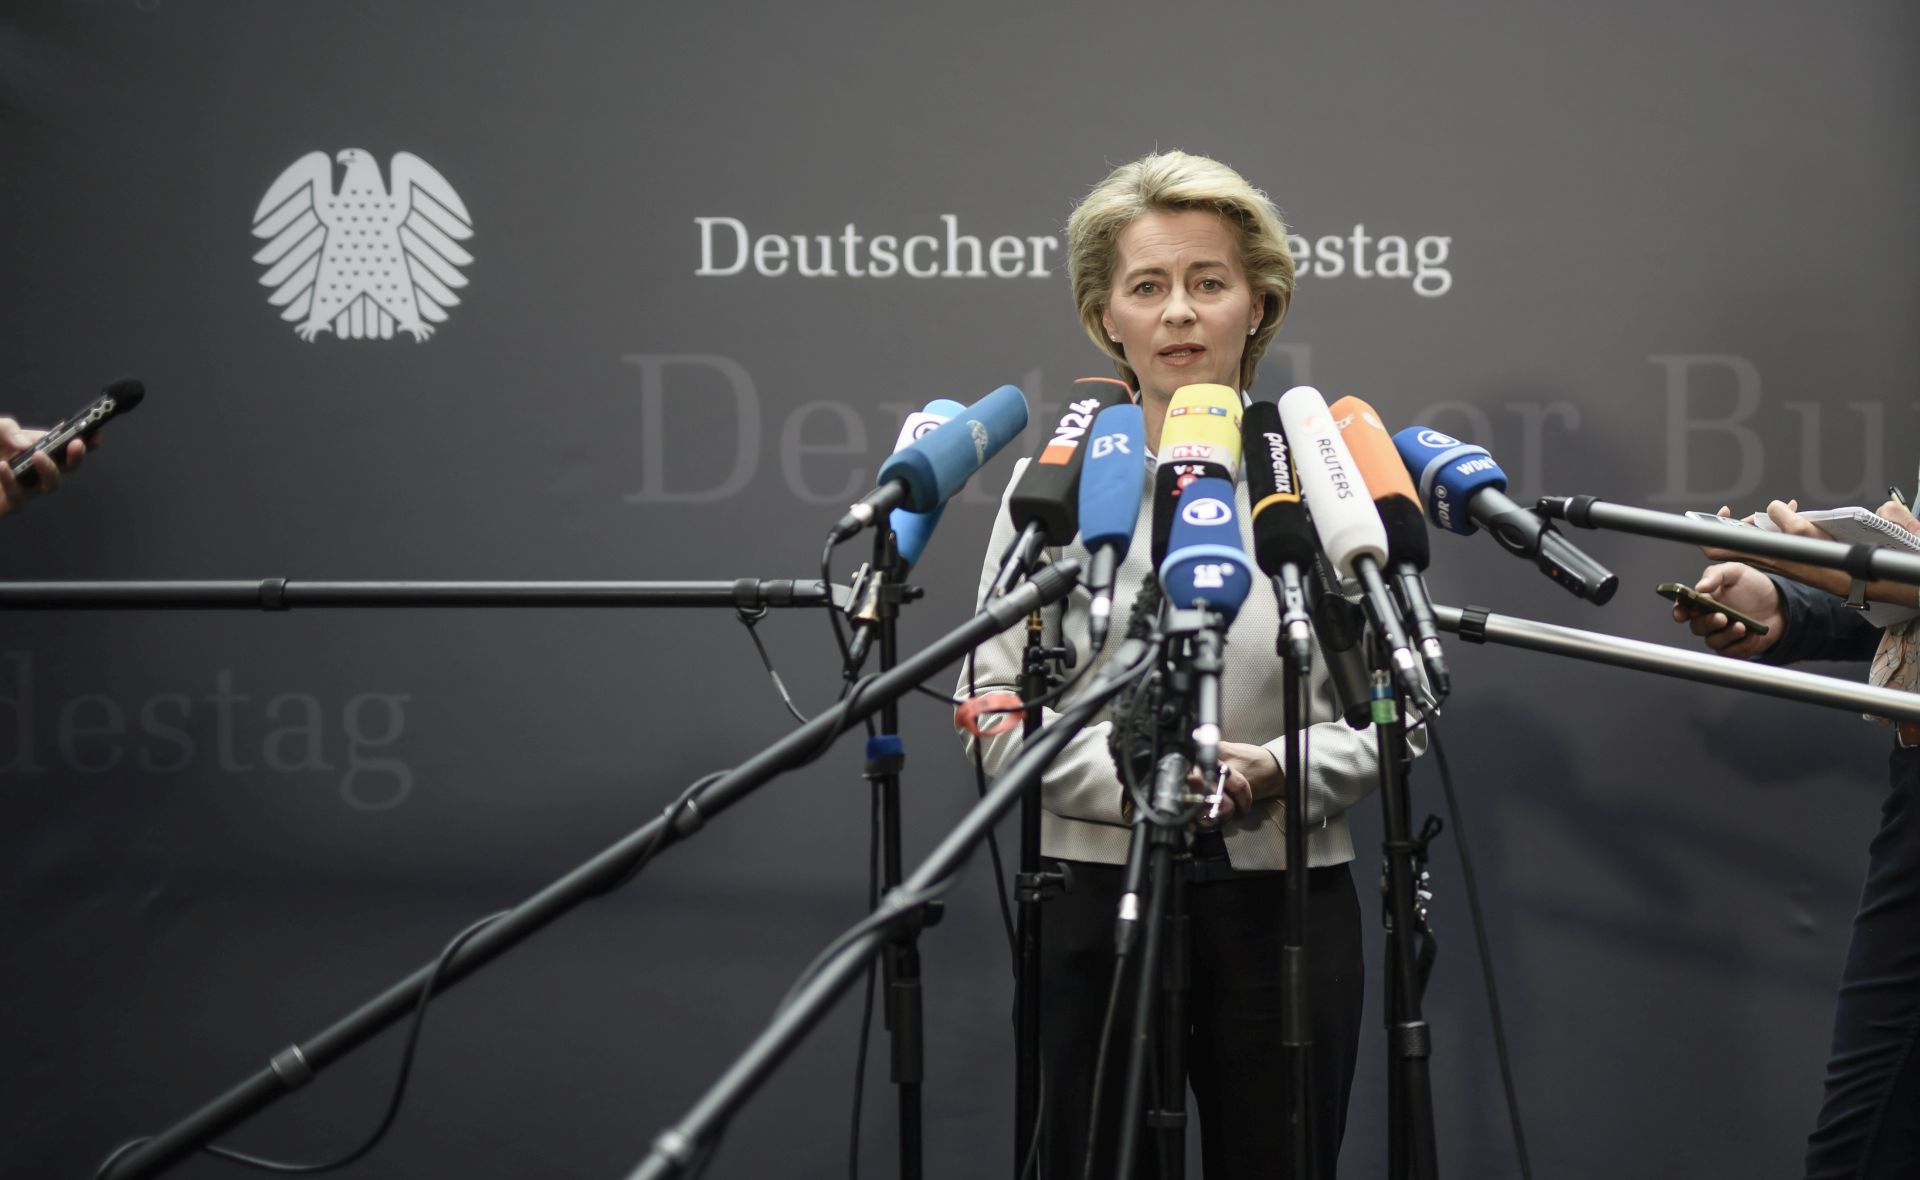 epa05954258 German Defense Minister Ursula von der Leyen gives a press statement prior to a session of the defense committee at the German Parliament in Berlin, Germany, 10 May 2017. Von der Leyen is about to inform the defense commitee over the current controversy involving the German Army Lieutenant Franco A., a right-wing extremist who disguised himself as a Syrian refugee and planned a terrorist attack. On 09 May 2017 a suspected supporter of Lieutenant Franco A. was arrested and presented to the German federal prosecutor.  EPA/CLEMENS BILAN